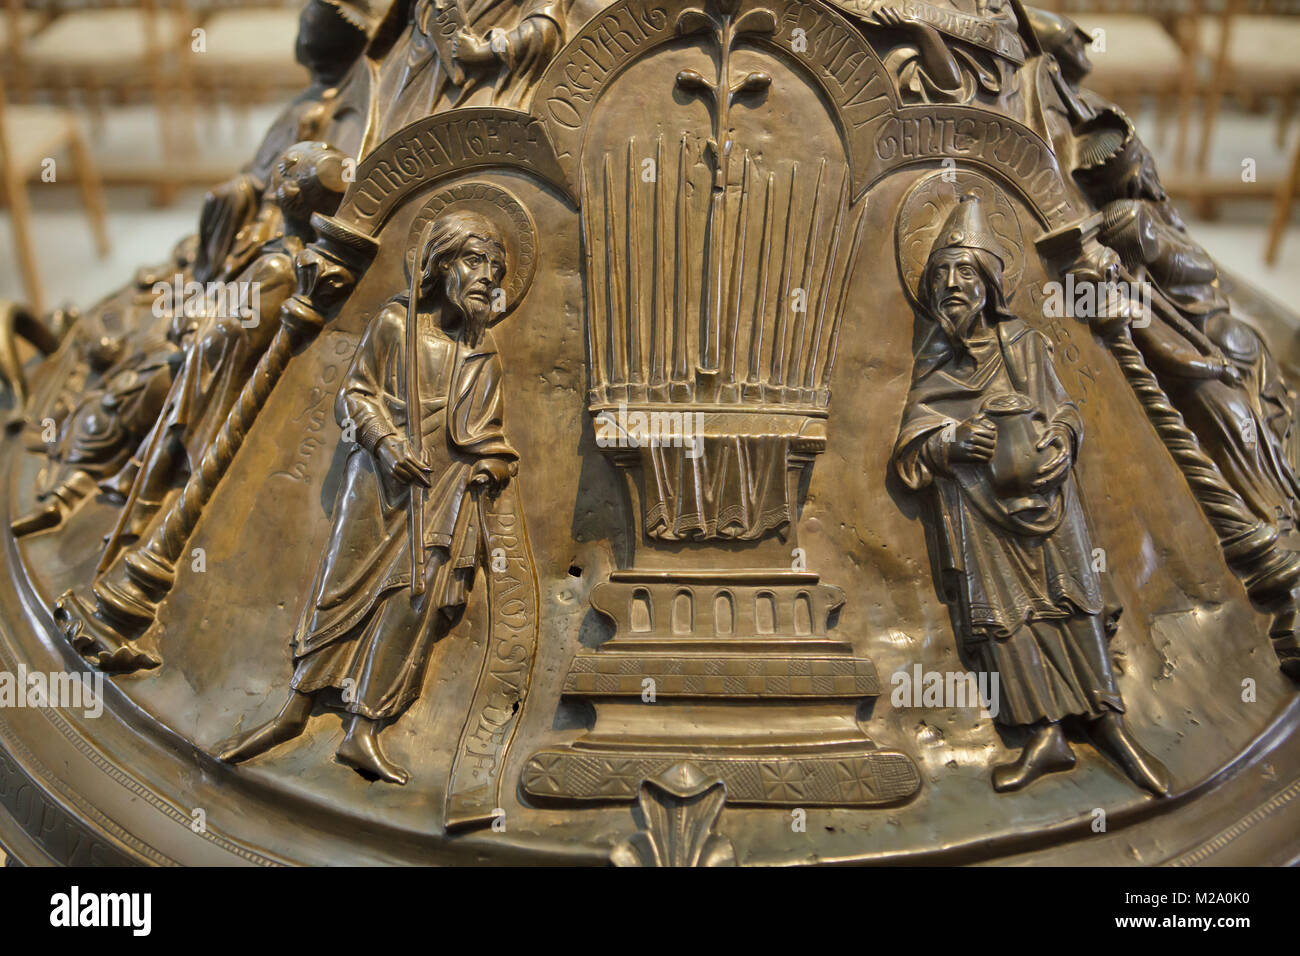 Blossoming of Aaron's Rod. Romanesque relief on the cover of the bronze baptismal font (Bronzetaufe) from the 11th century in the Hildesheim Cathedral (Hildesheimer Dom) in Hildesheim in Lower Saxony, Germany. Stock Photo